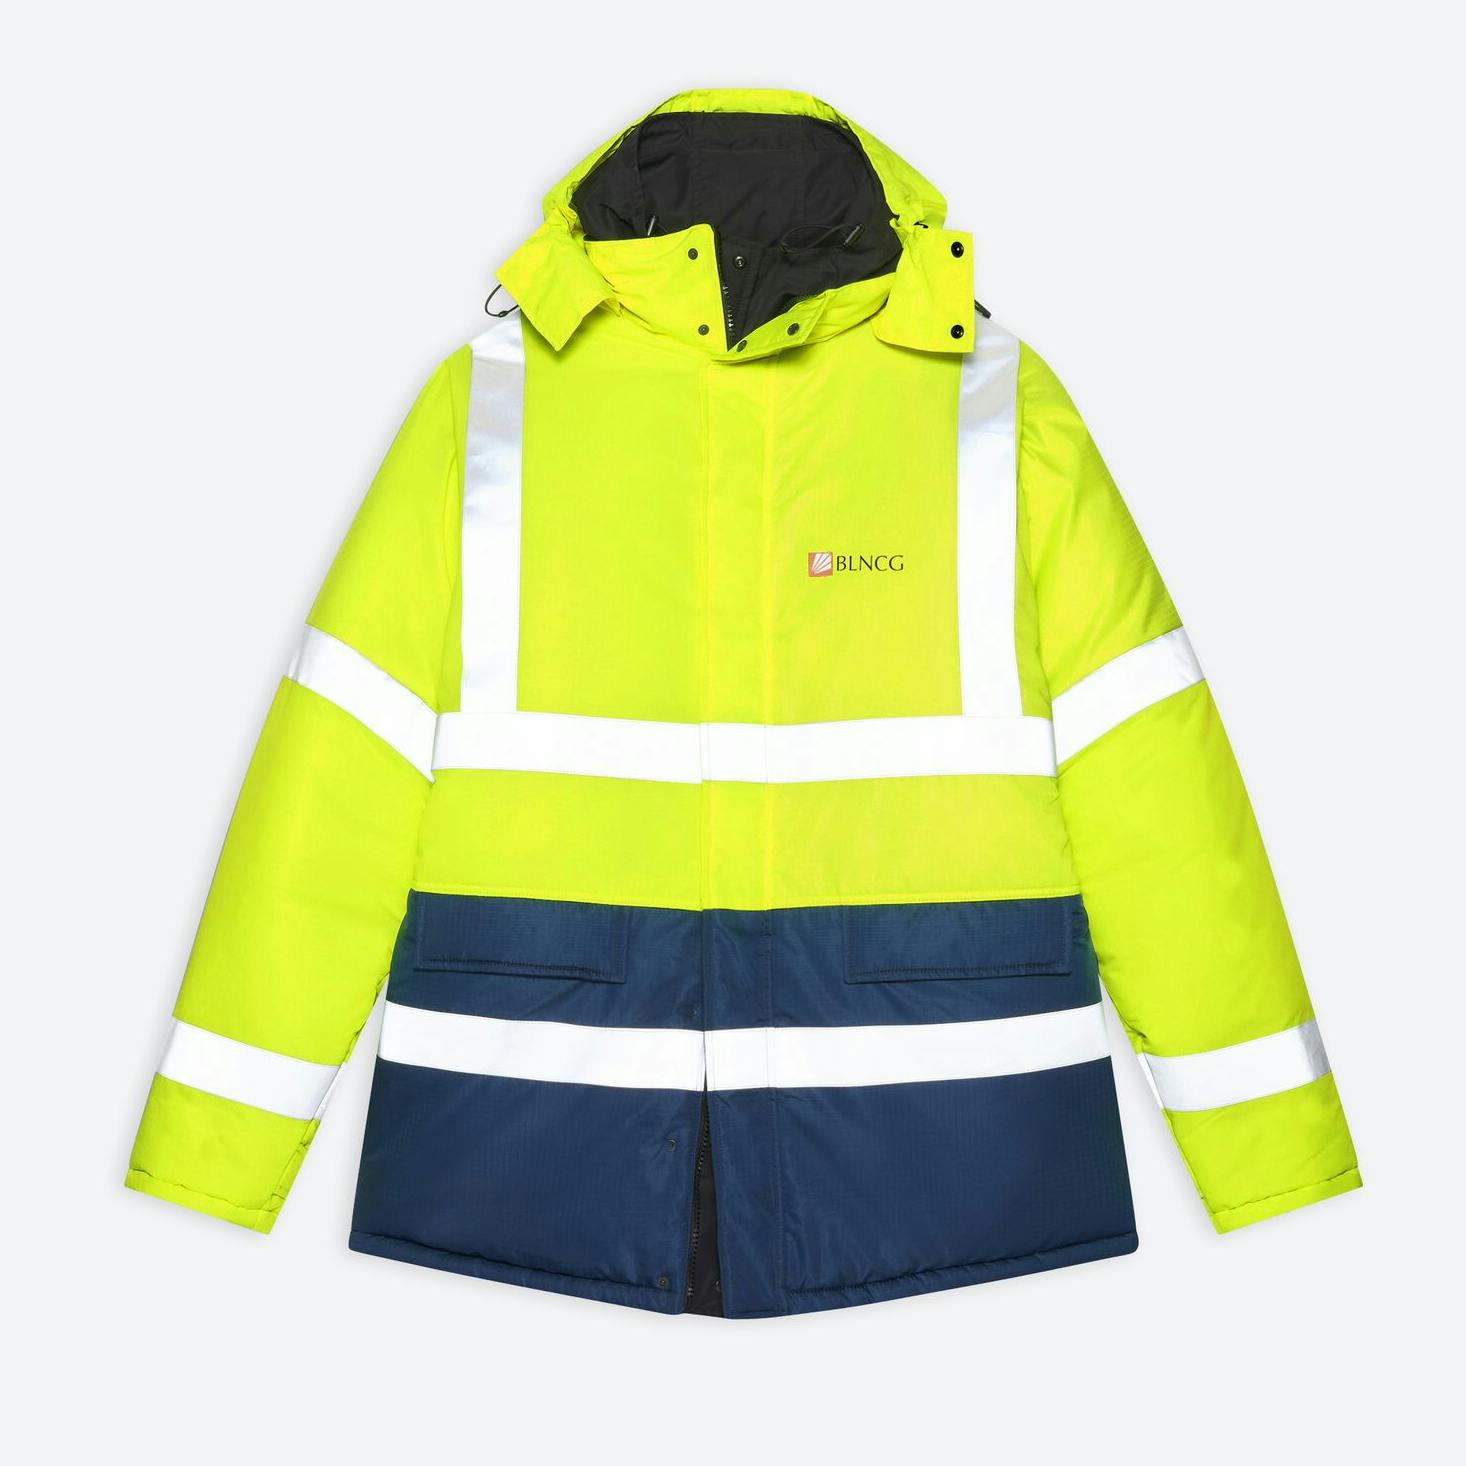 Balenciaga is Selling a High-Vis Jacket for About $4,000 | Hybe.com